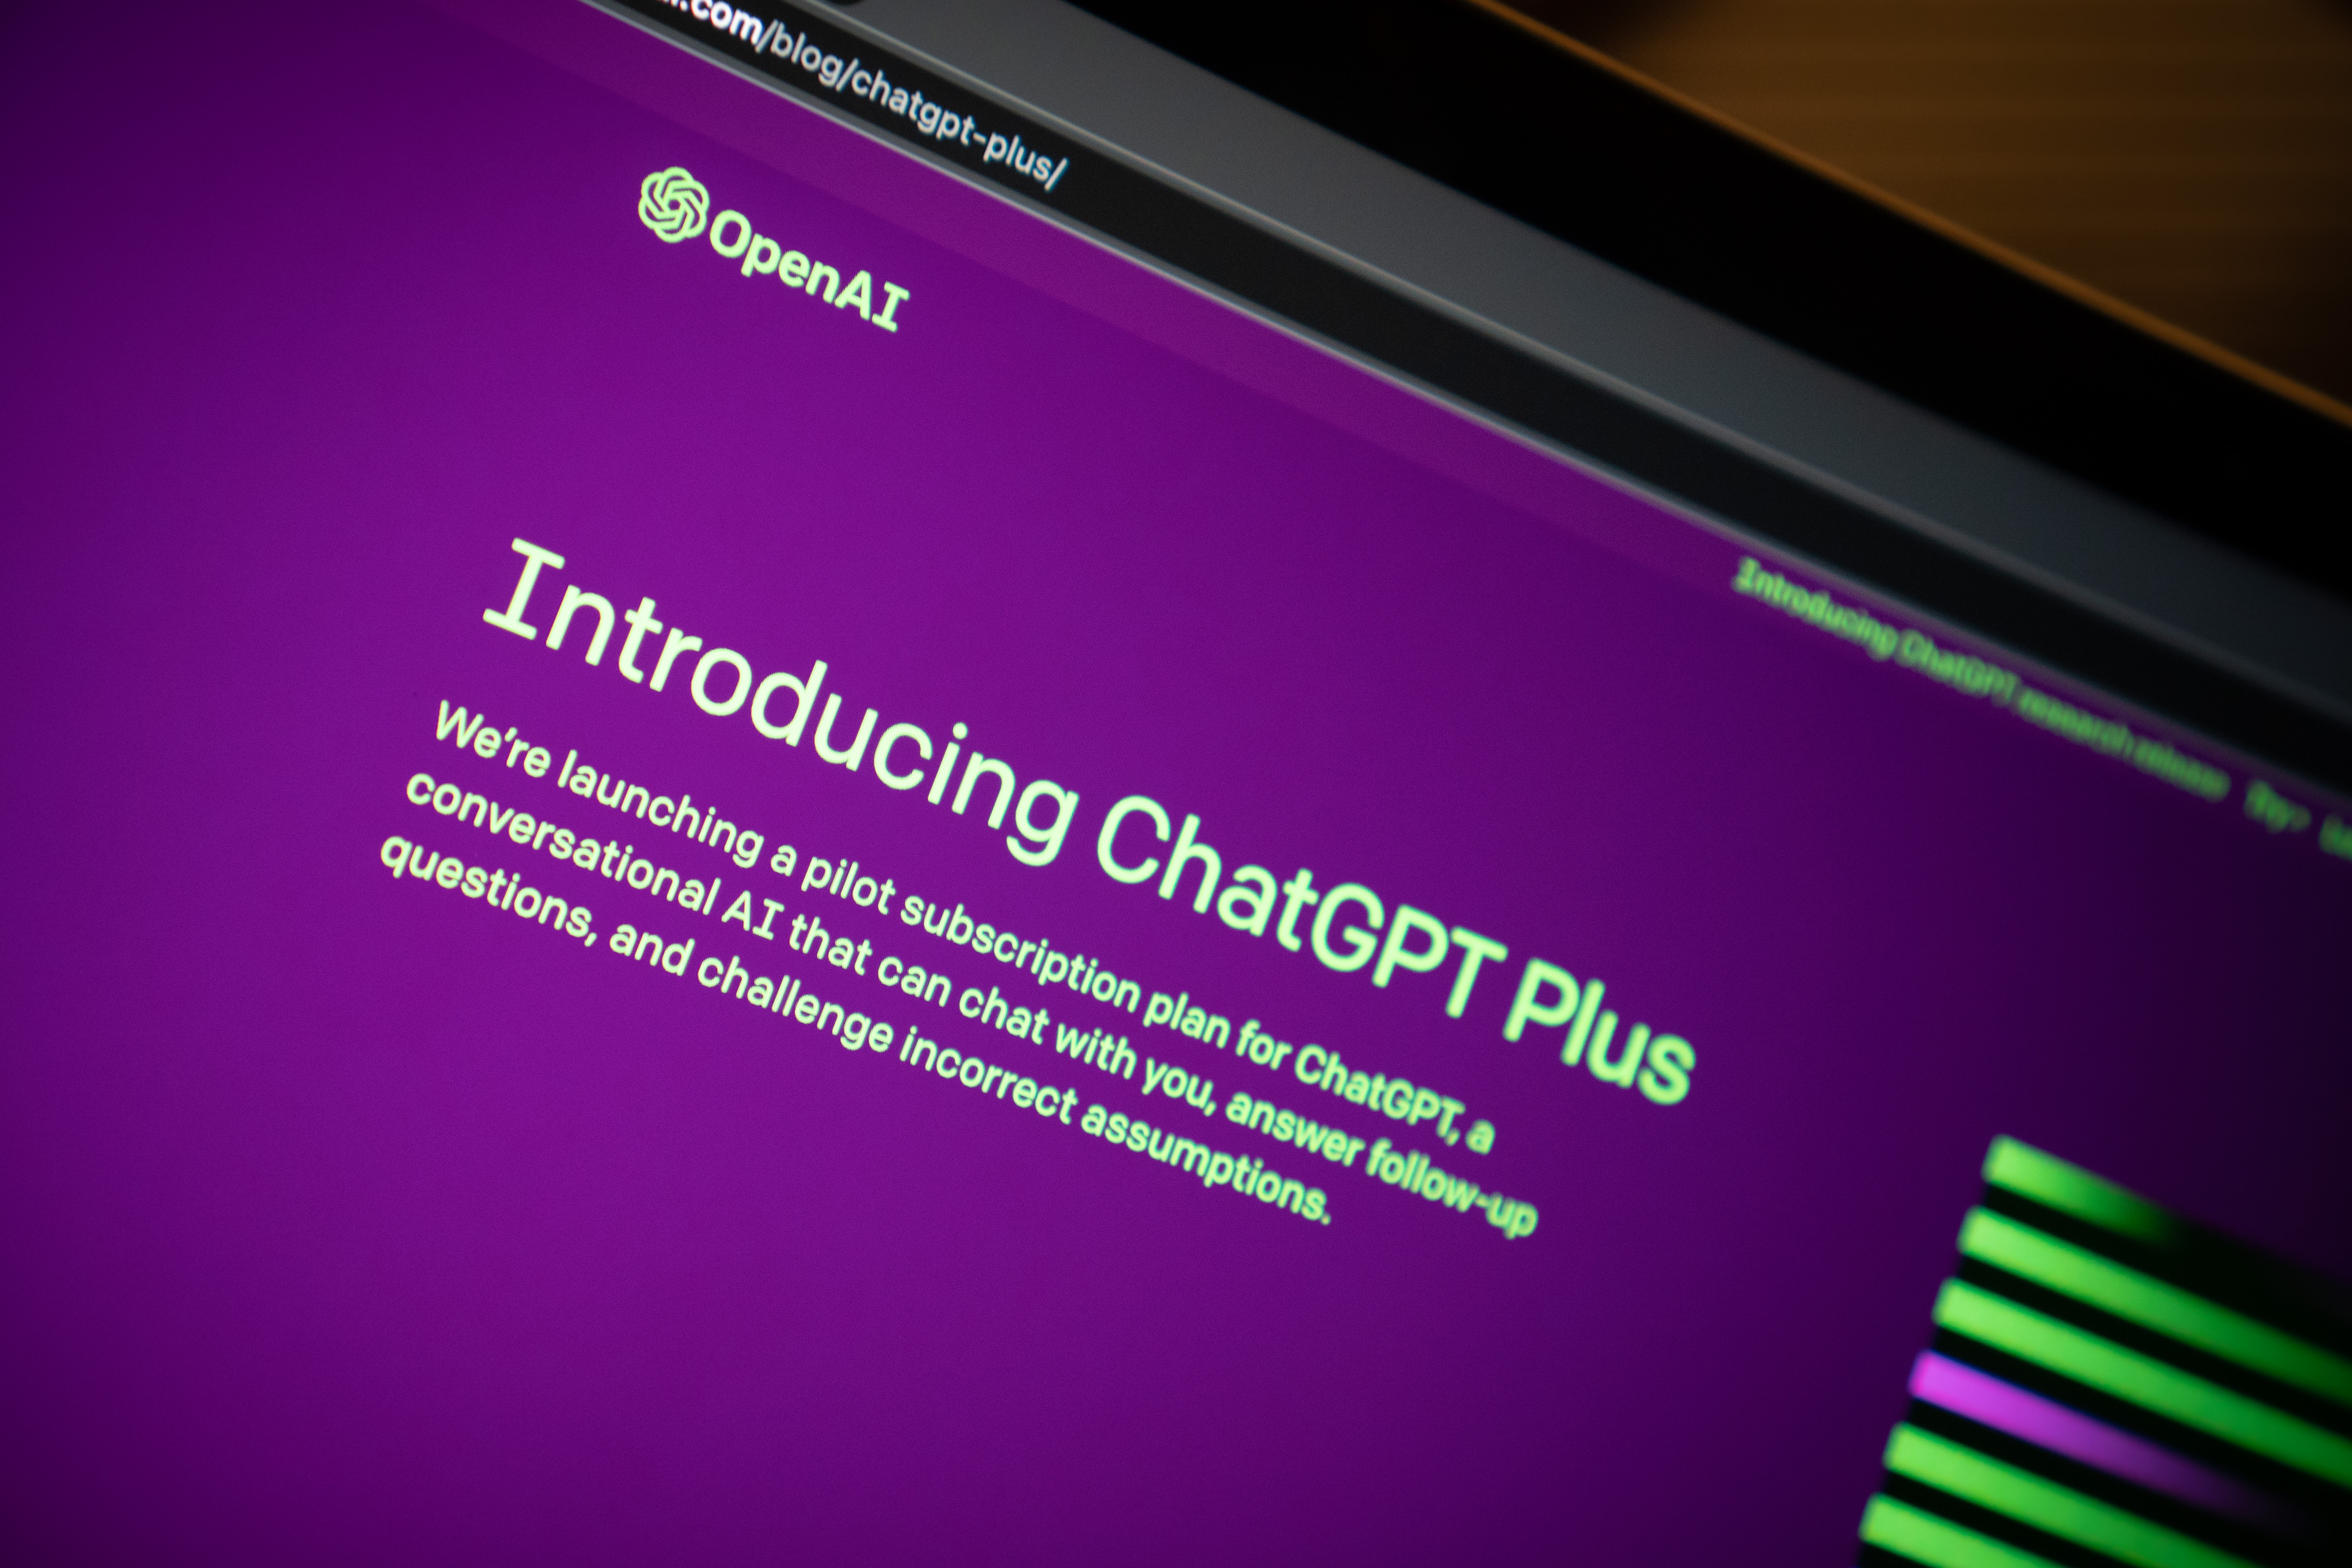 ChatGPT Plus subscribers now have the ability to upload and work with files